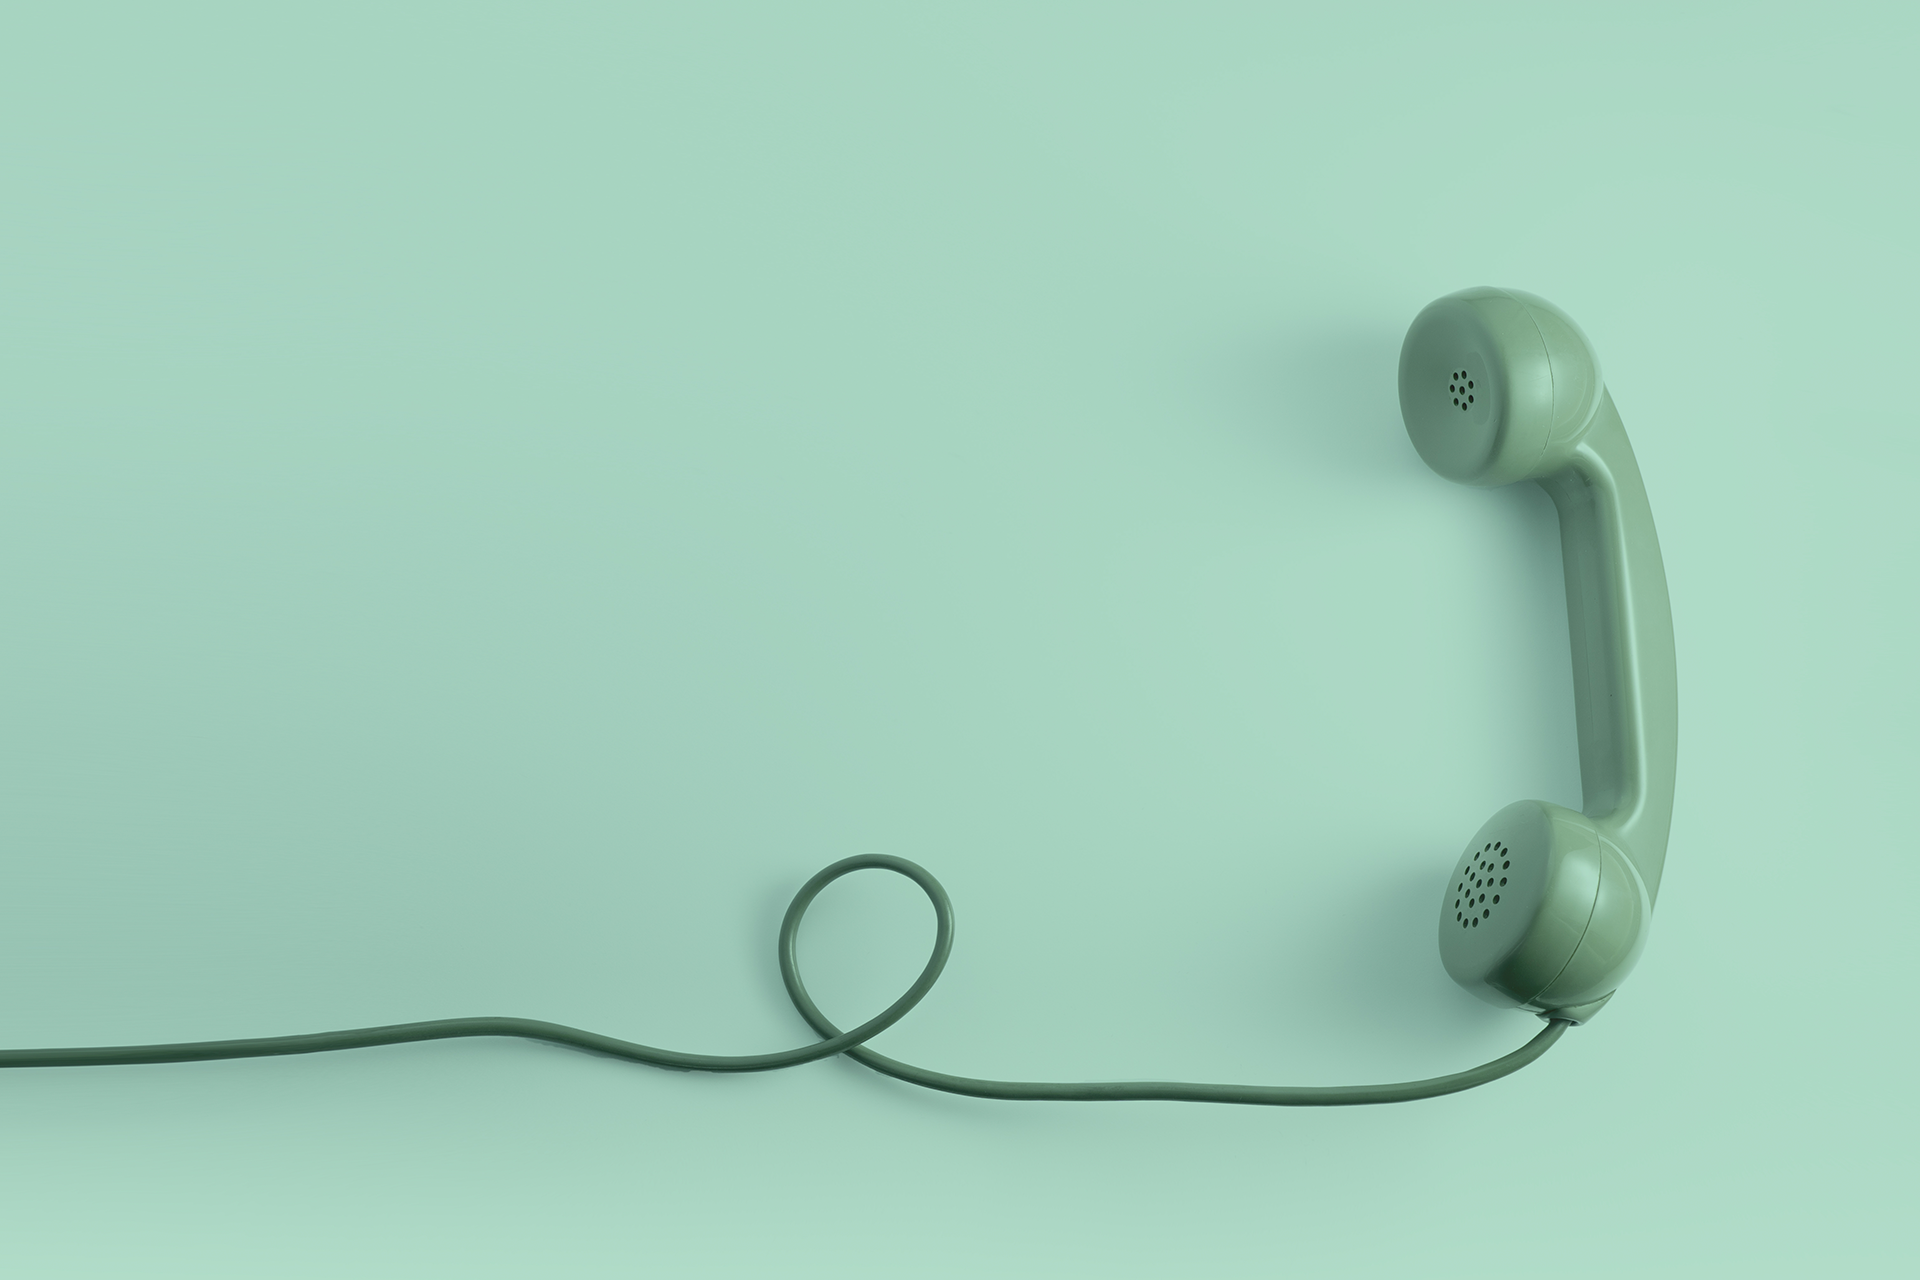 Green old fashioned telephone. Header image for blog post: why word of mouth marketing is important.